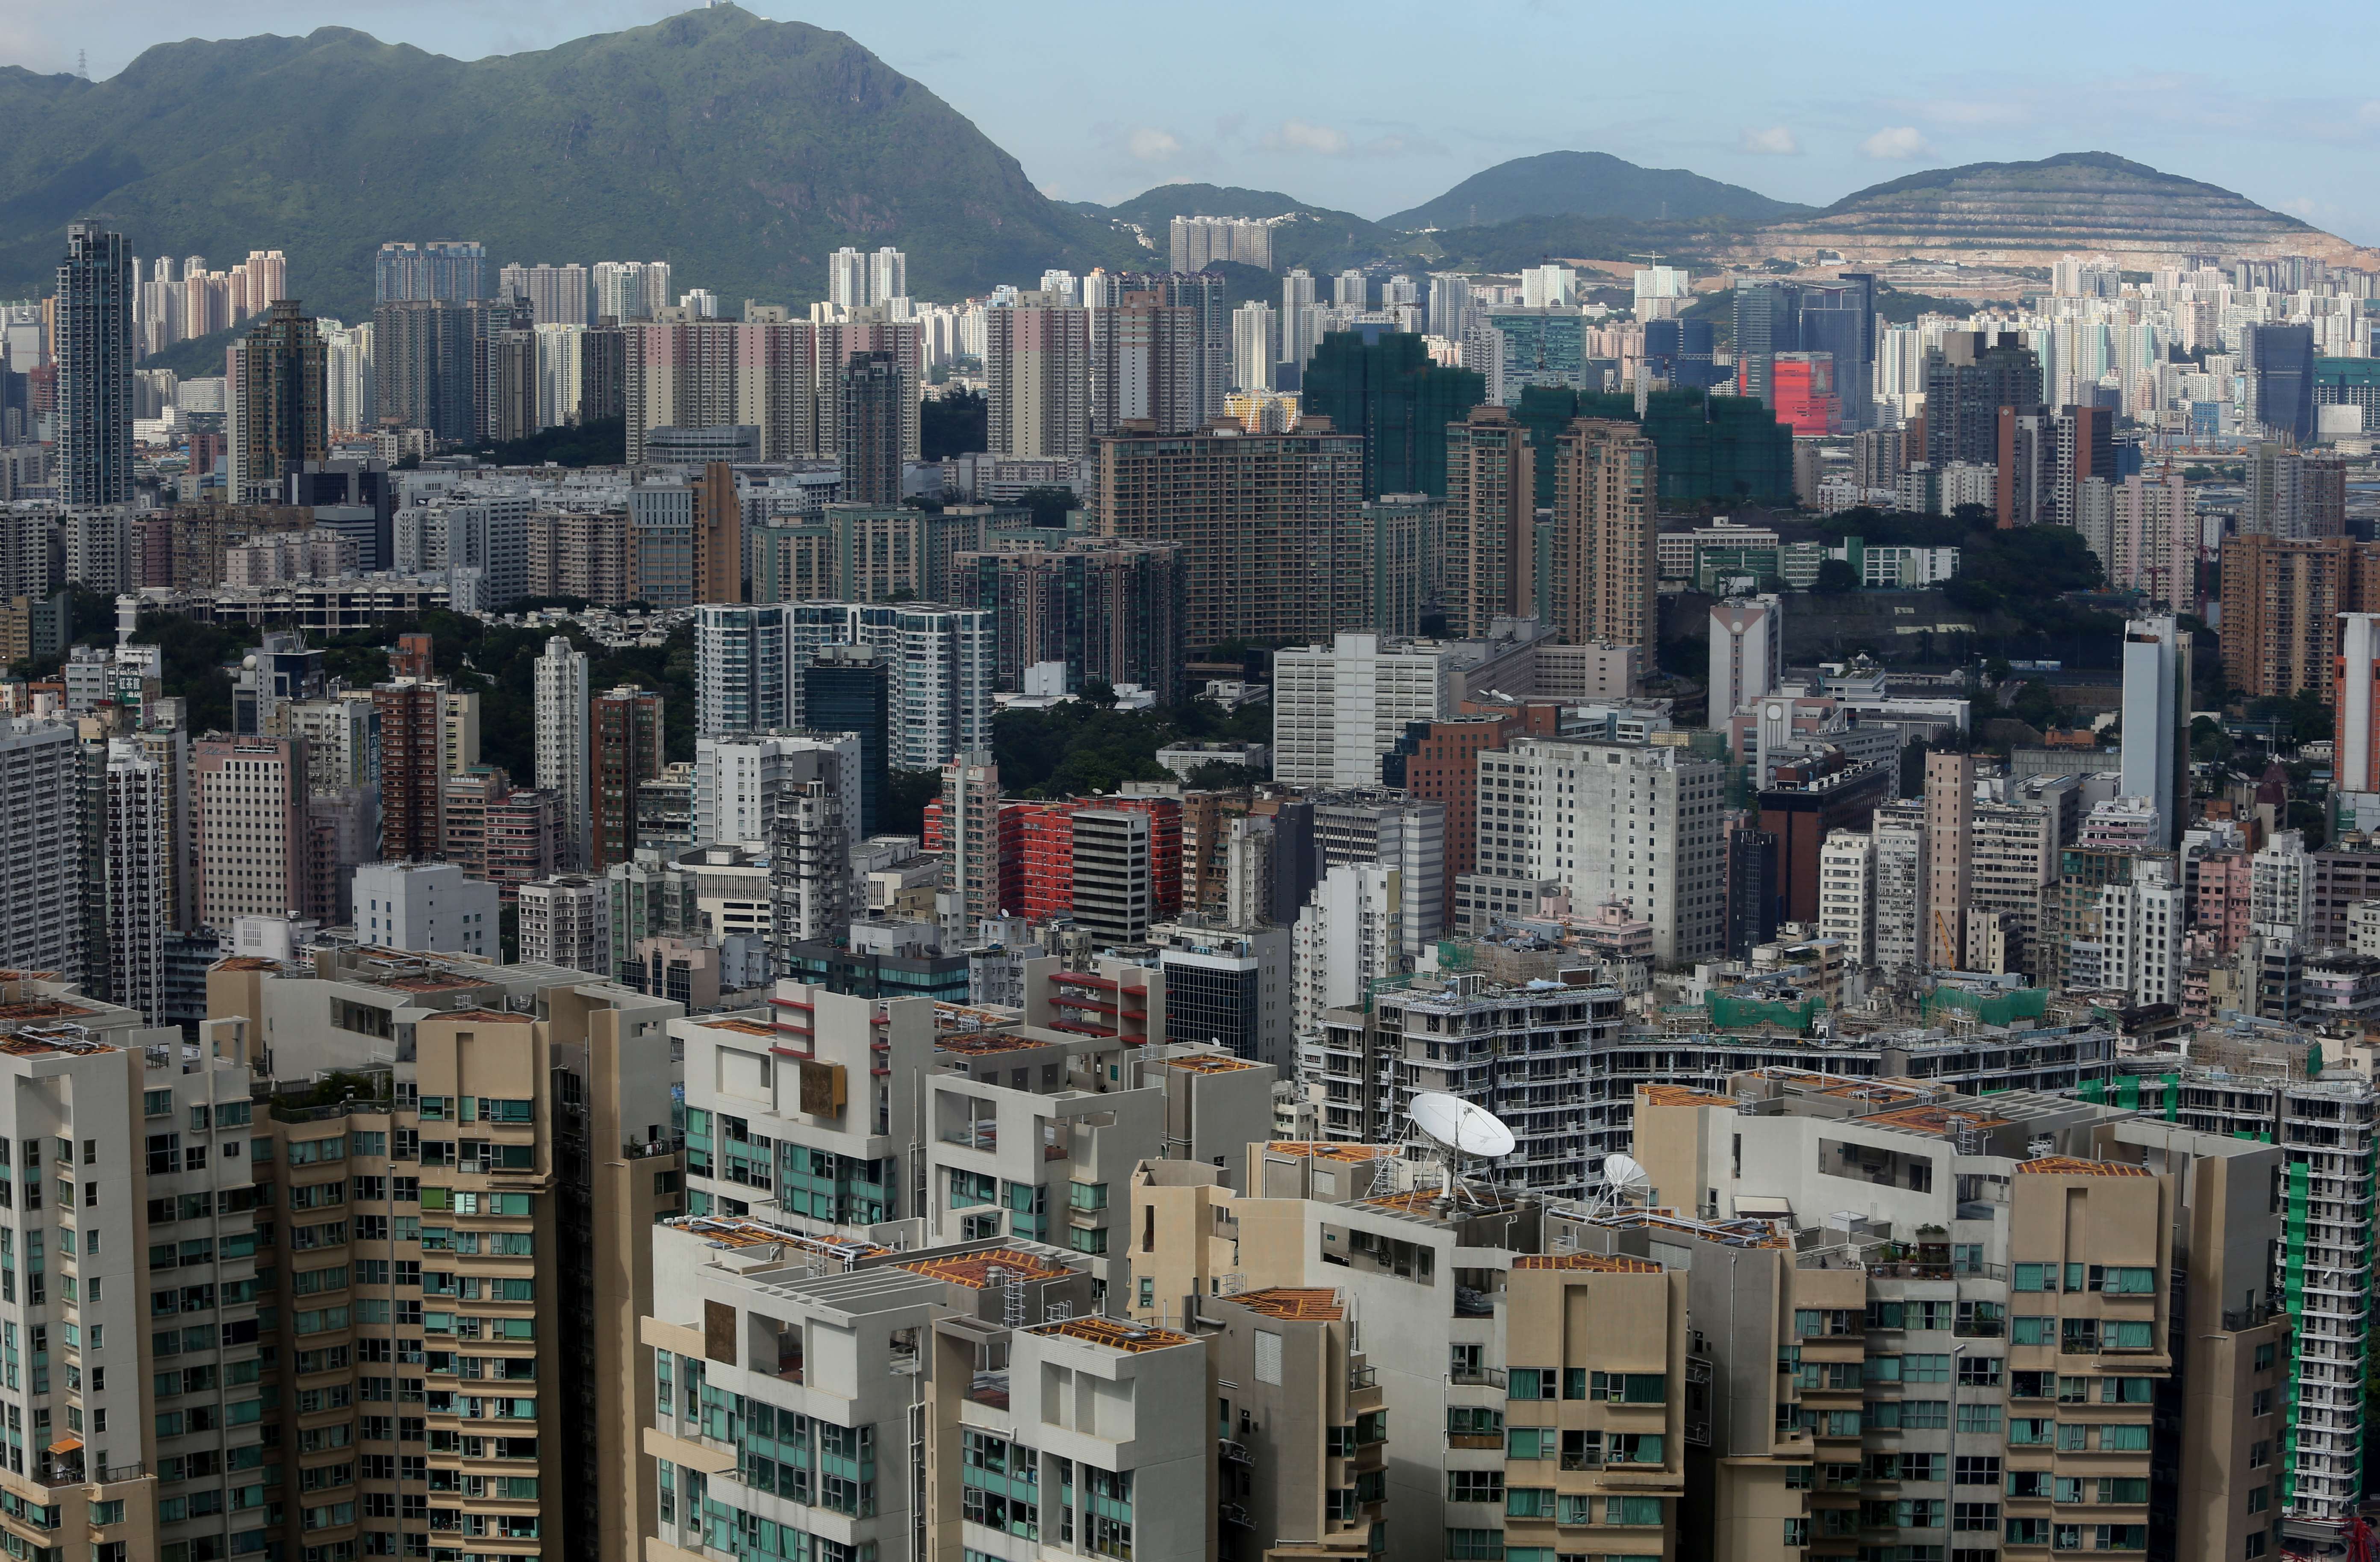 Kerry Properties has outbid ten other companies to win a luxury residential site at Kowloon Tong’s Beacon Hill after paying HK$7.268 billion, in the government’s most expensive land sale this year. Photo: Sam Tsang